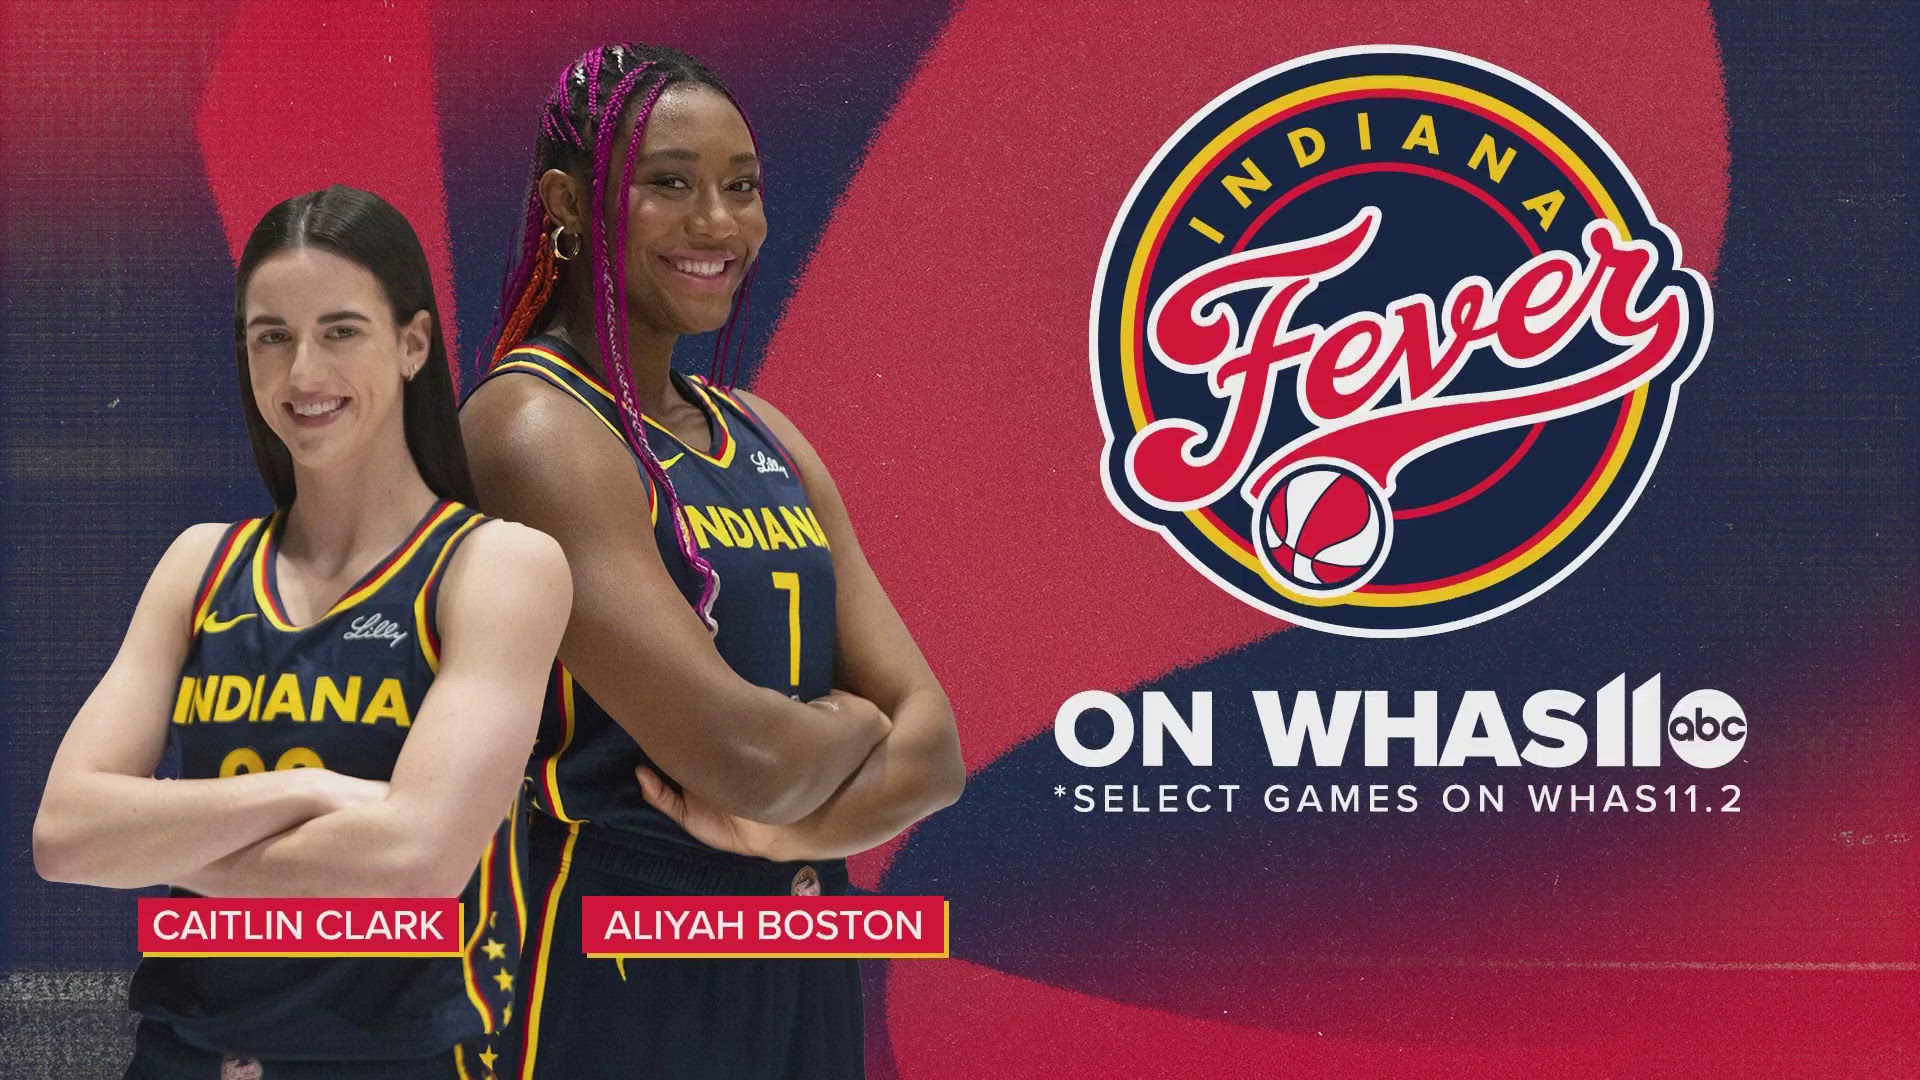 TEGNA Inc. and the WNBA announced a partnership Wednesday to broadcast several Fever games this season.